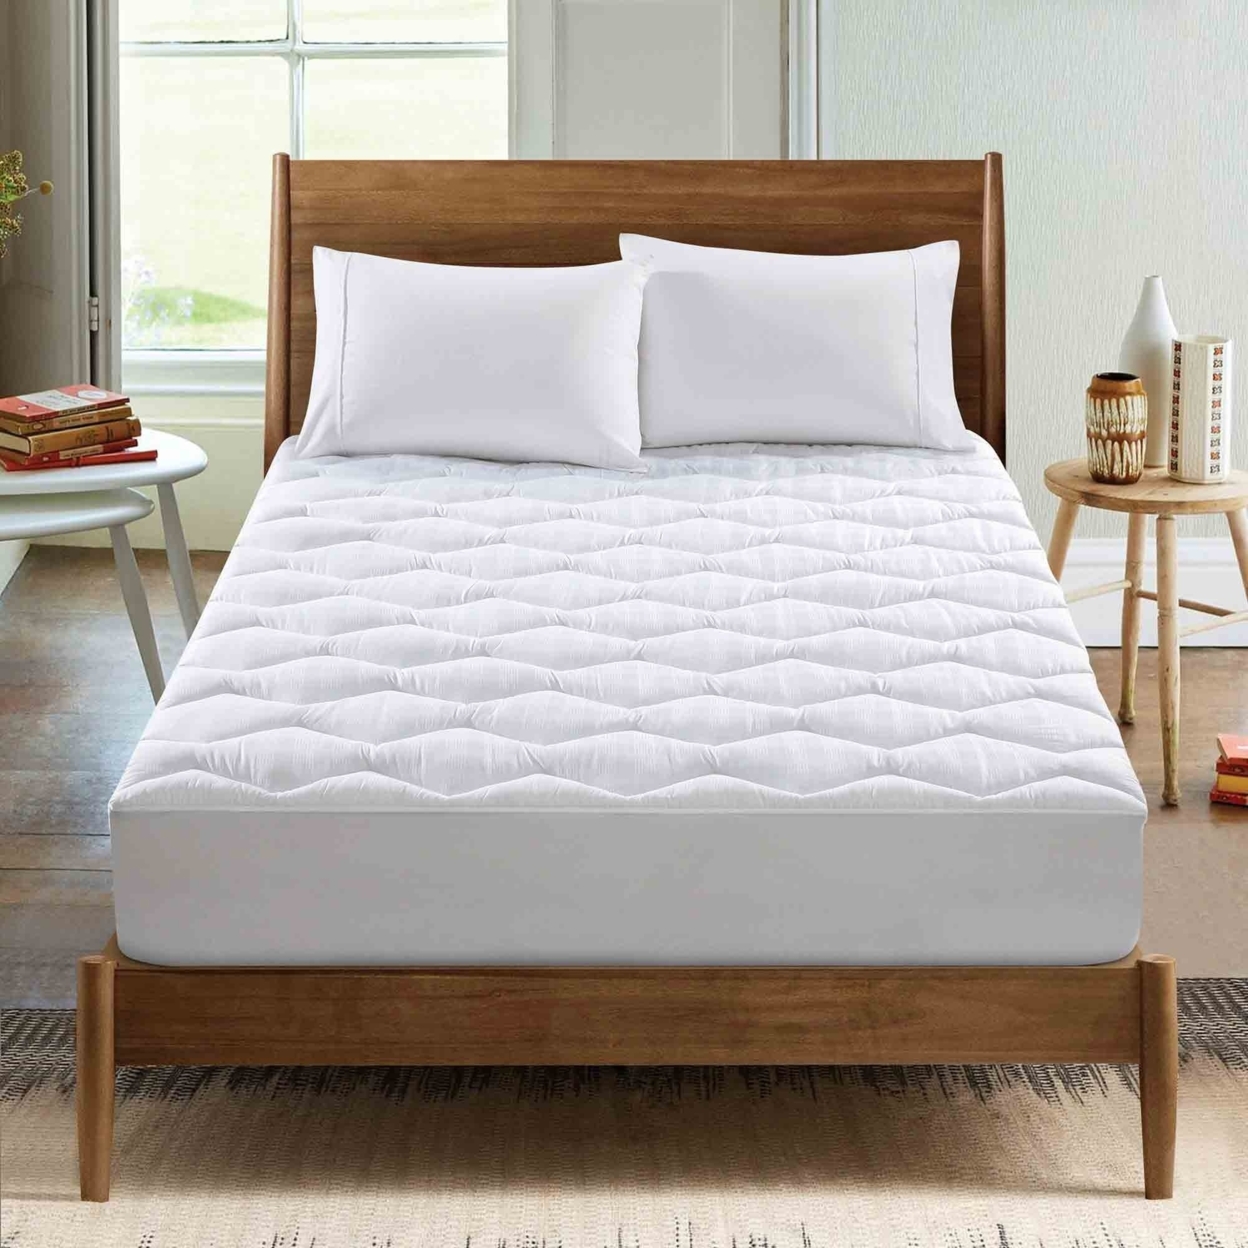 Down Alternative Mattress Pad With 500 Thread Count Cotton Cover, 18 Inch Deep, Soft And Breathable Bedding - Full, White